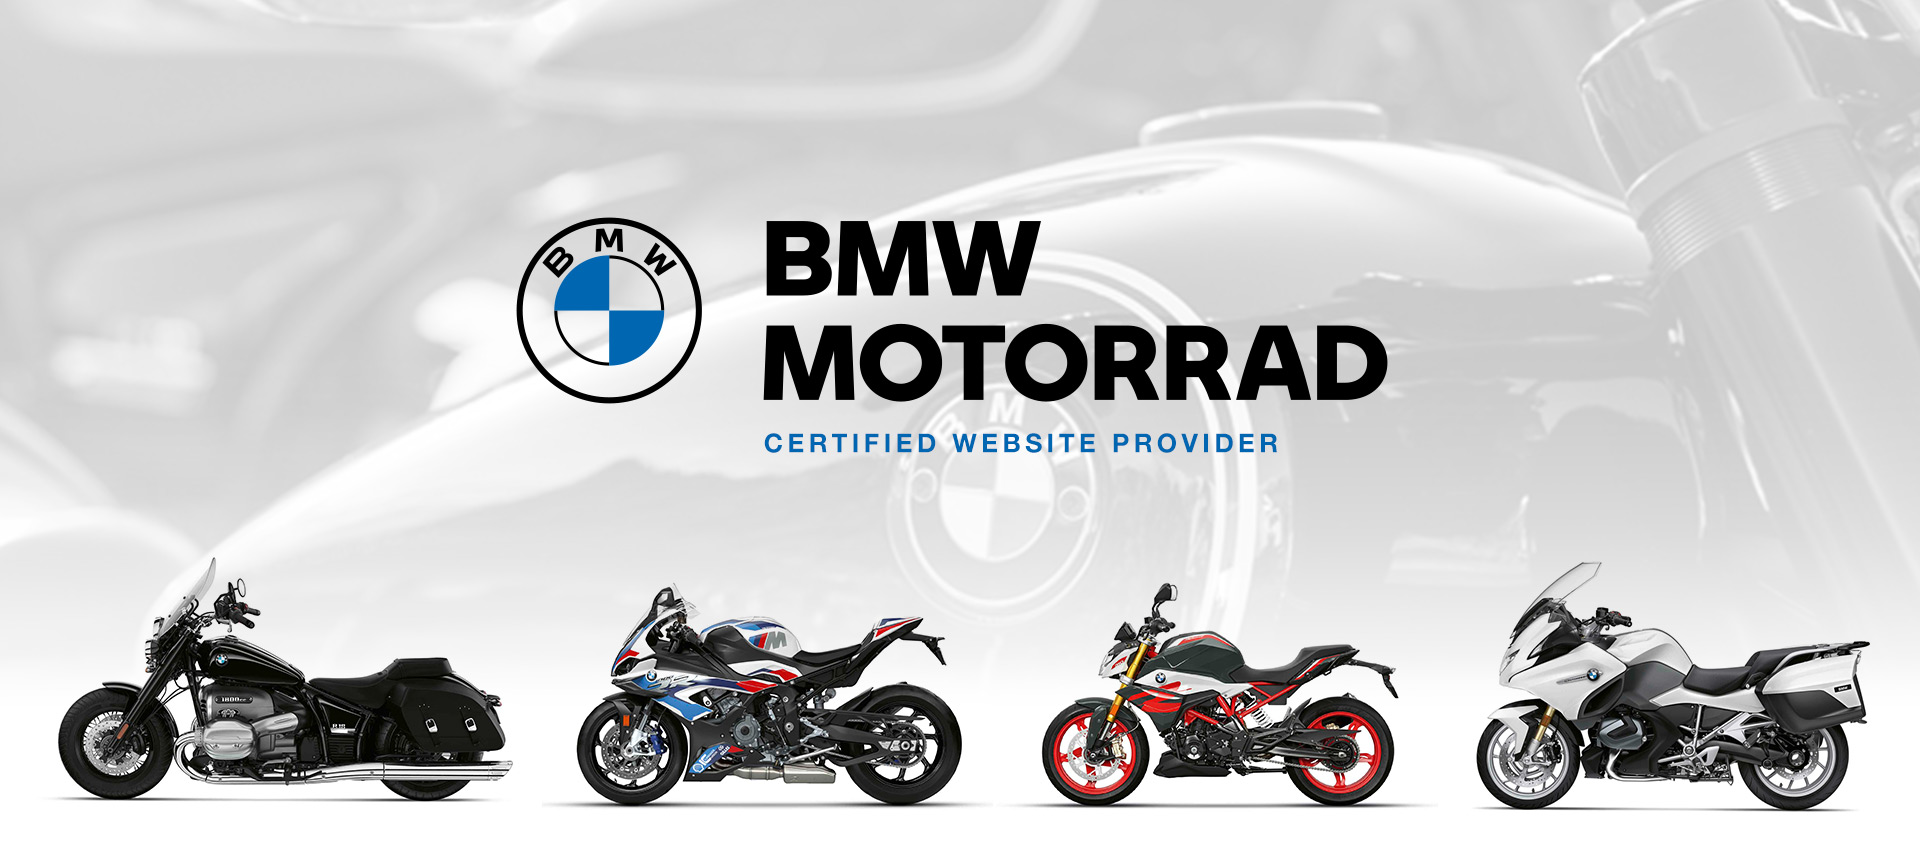  DX1 is proud to be a BMW Motorrad Certified Website Provider. 